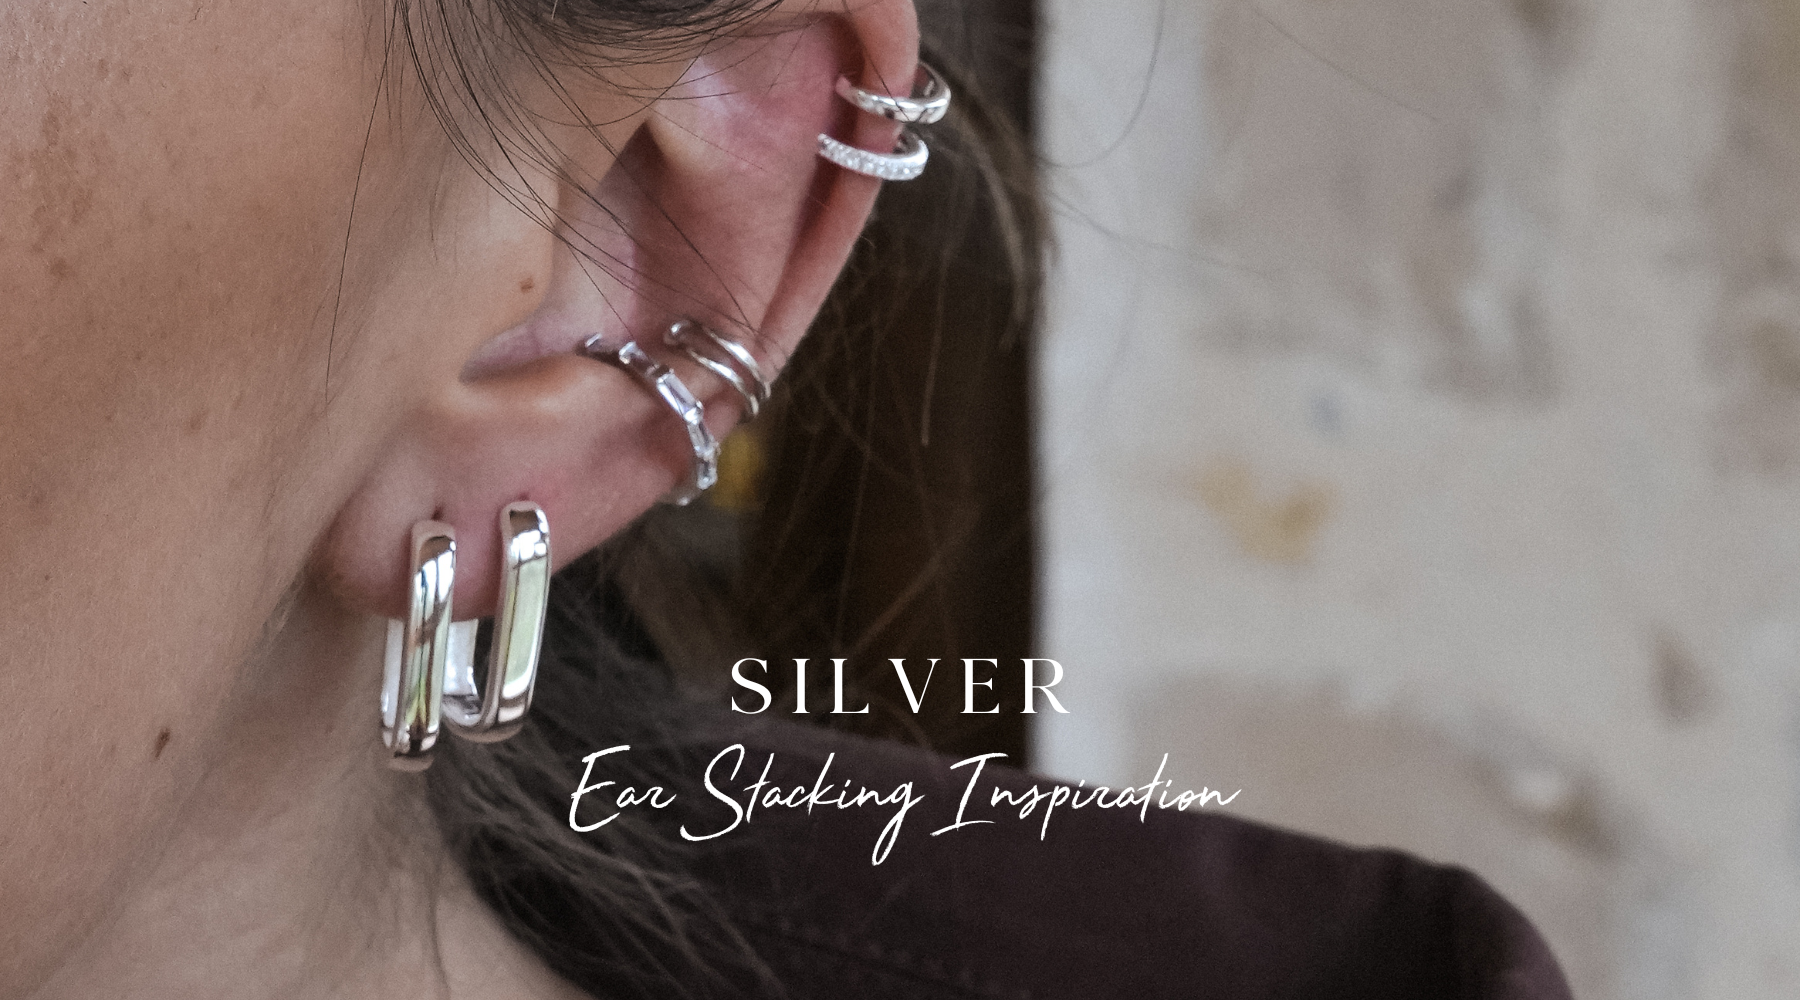 The Silver Collective  How To: Earring Stack 